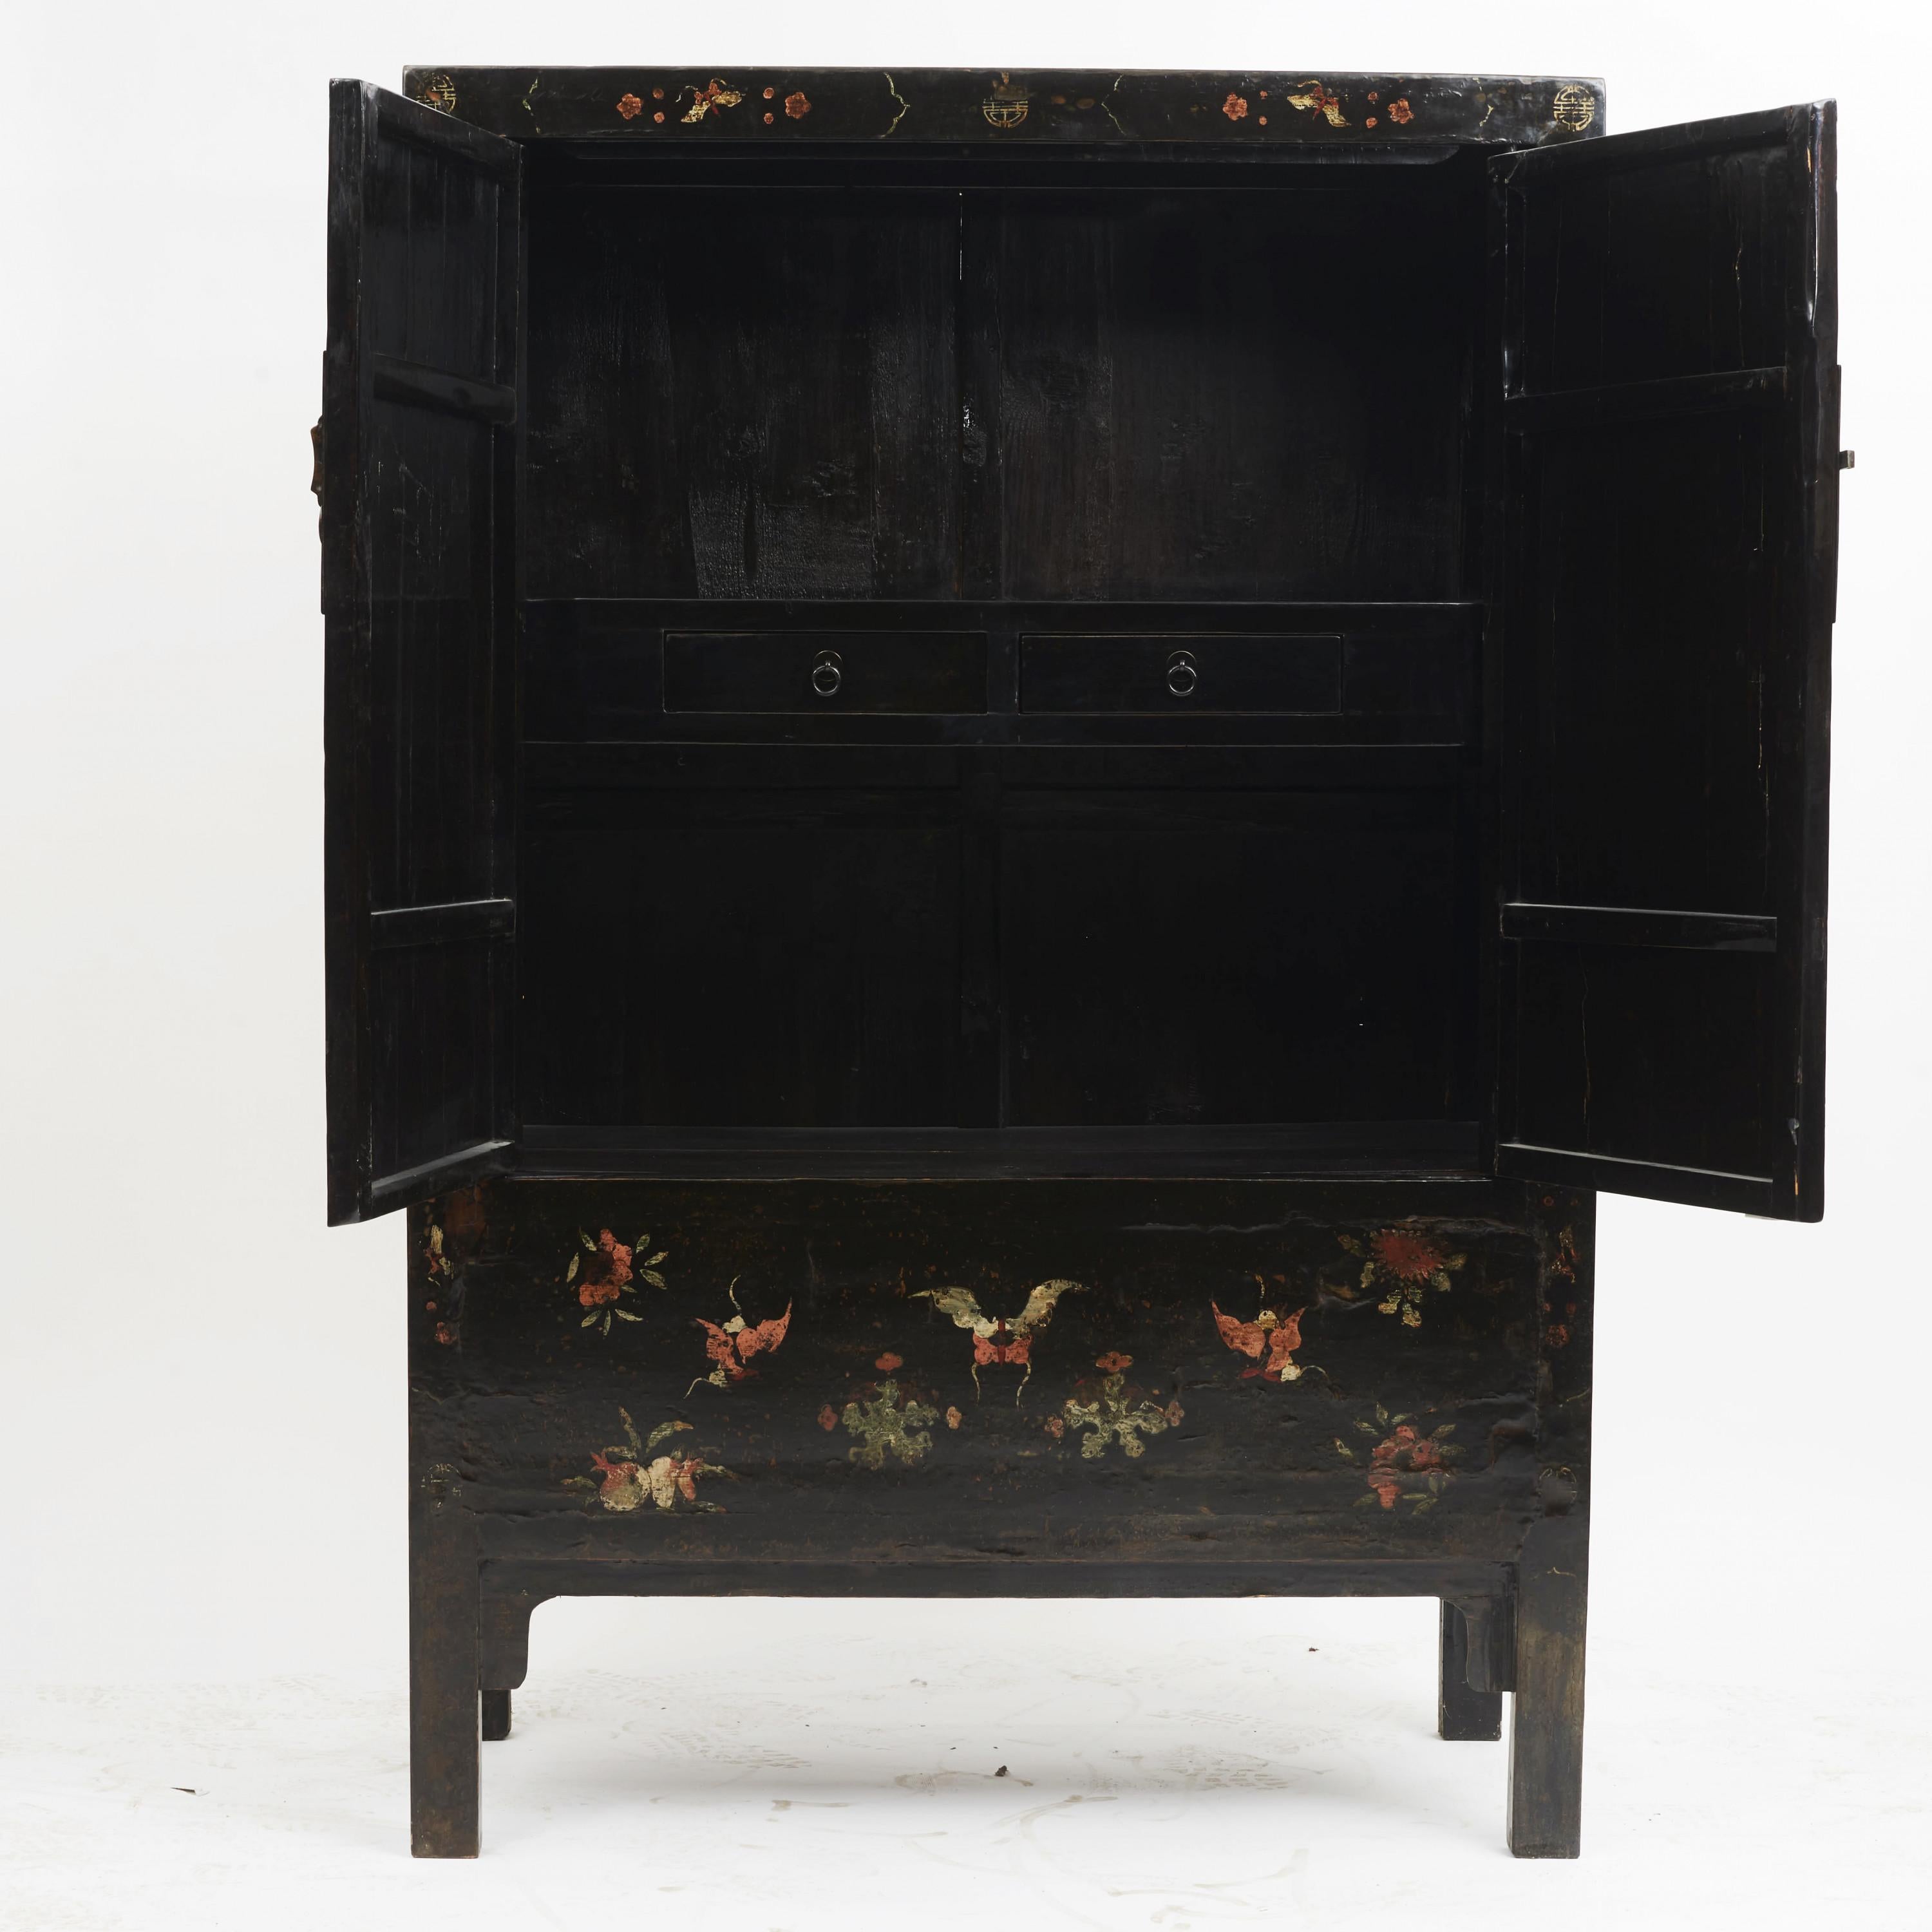 Lacquered cabinet with original hand painted chinoiserie decorations.
Original condition, charming age-related patina.
Shanxi Province(1820-1918), China, 1820-1840.
 